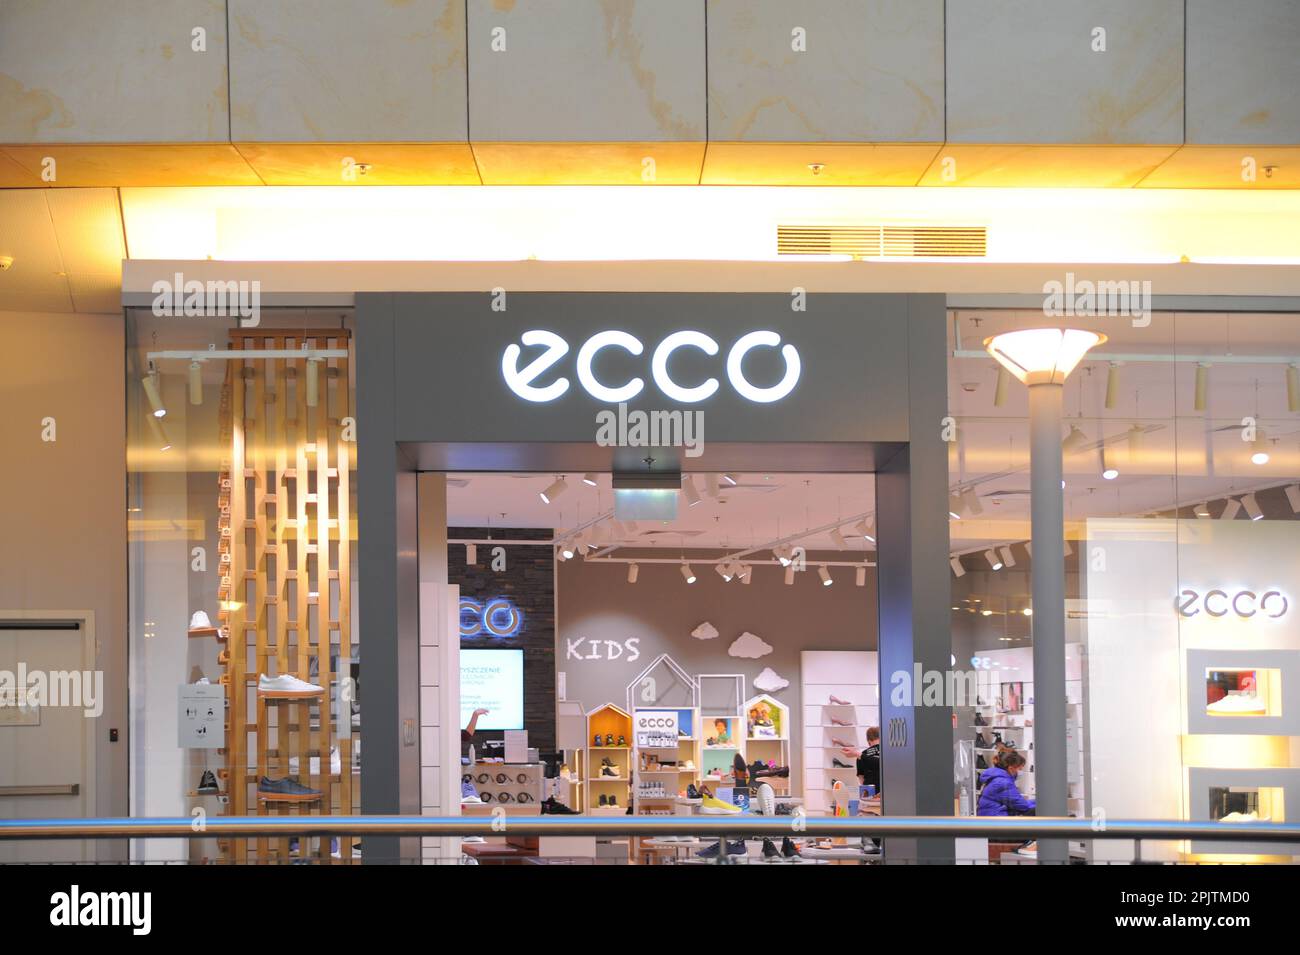 Ecco tourism photography images - Alamy